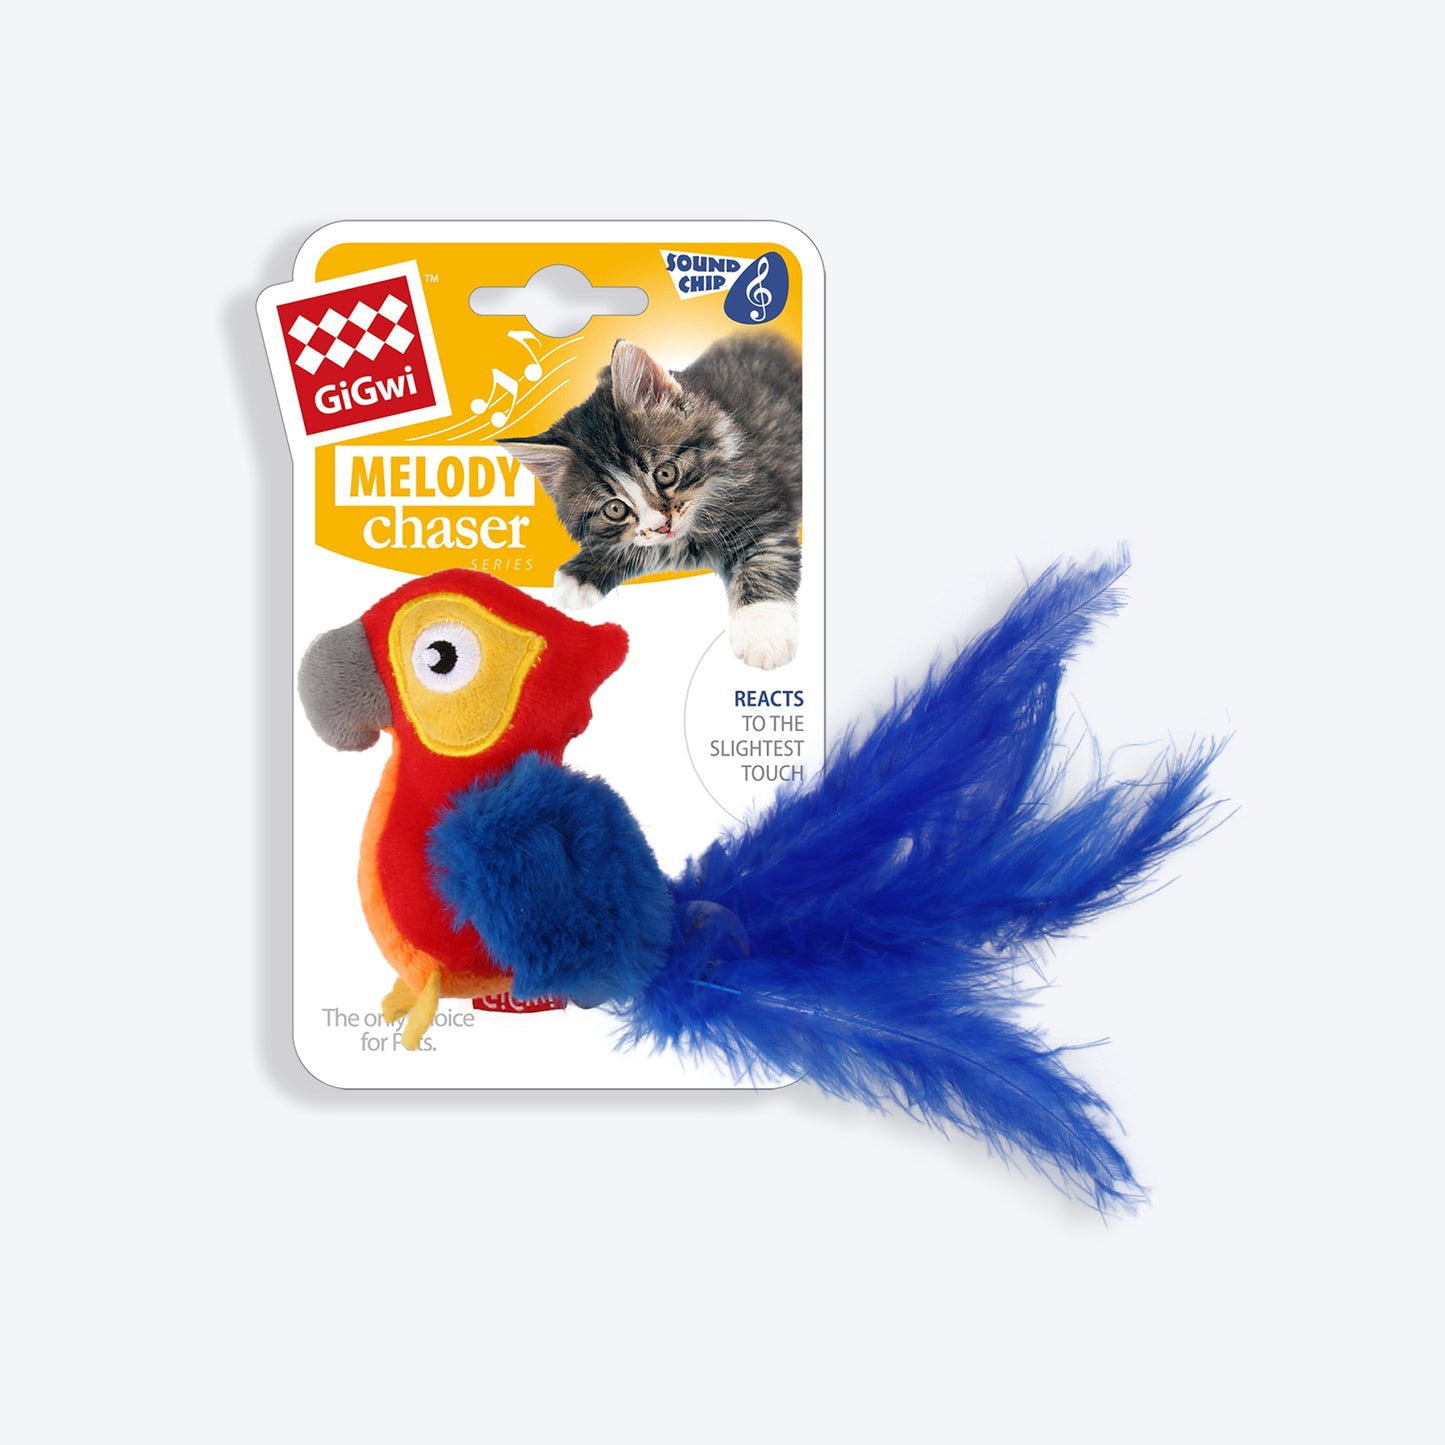 GiGwi Melody Chaser Cat Toy - Red Parrot (with Motion Activated Sound Chip)_03